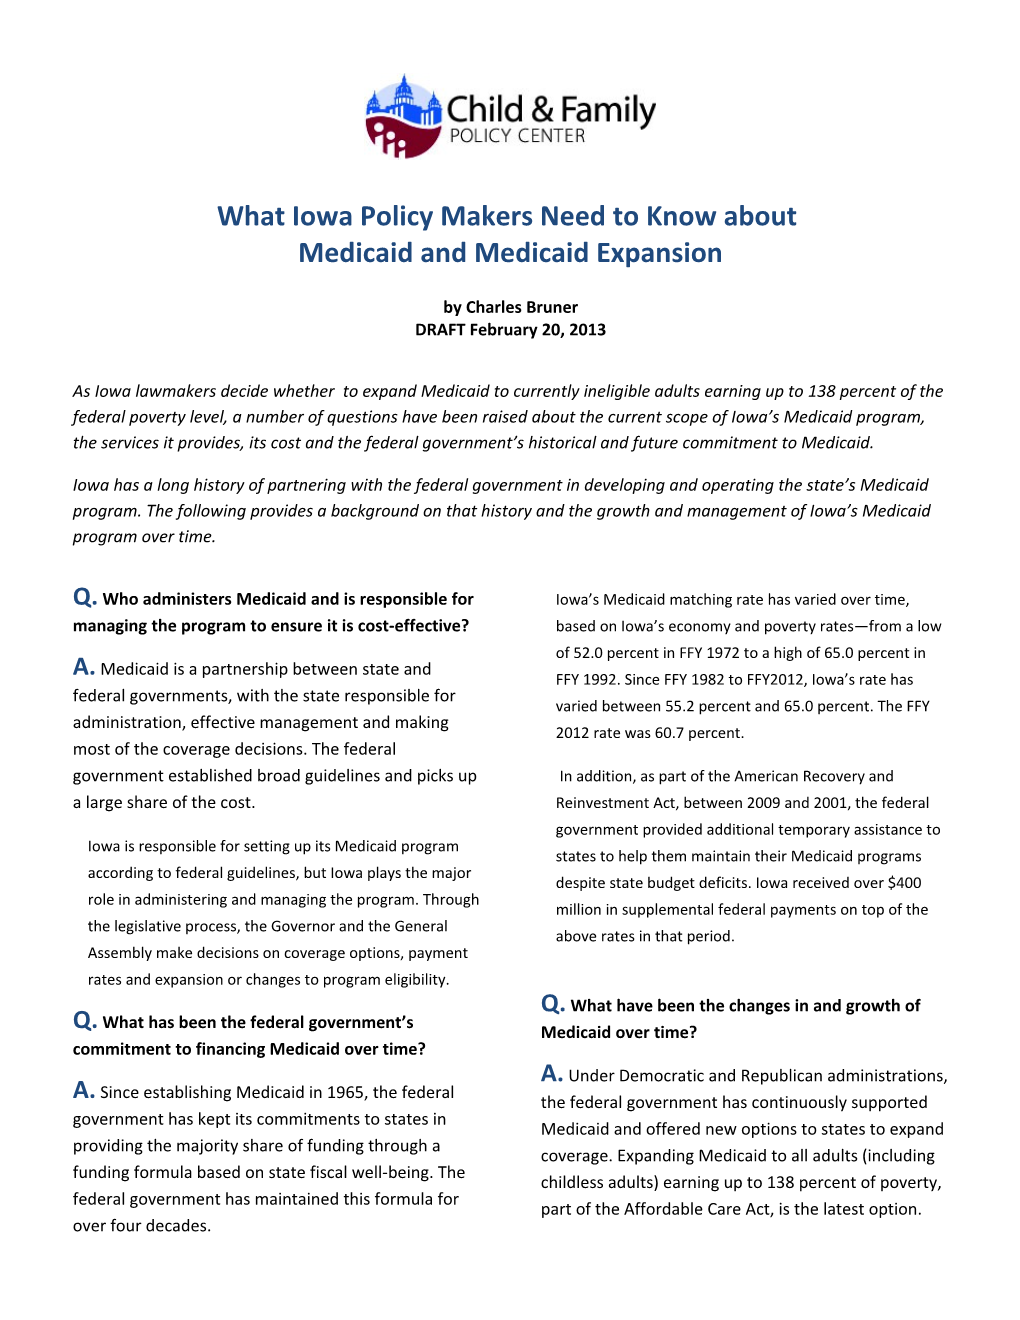 What Iowa Policy Makers Need to Know About